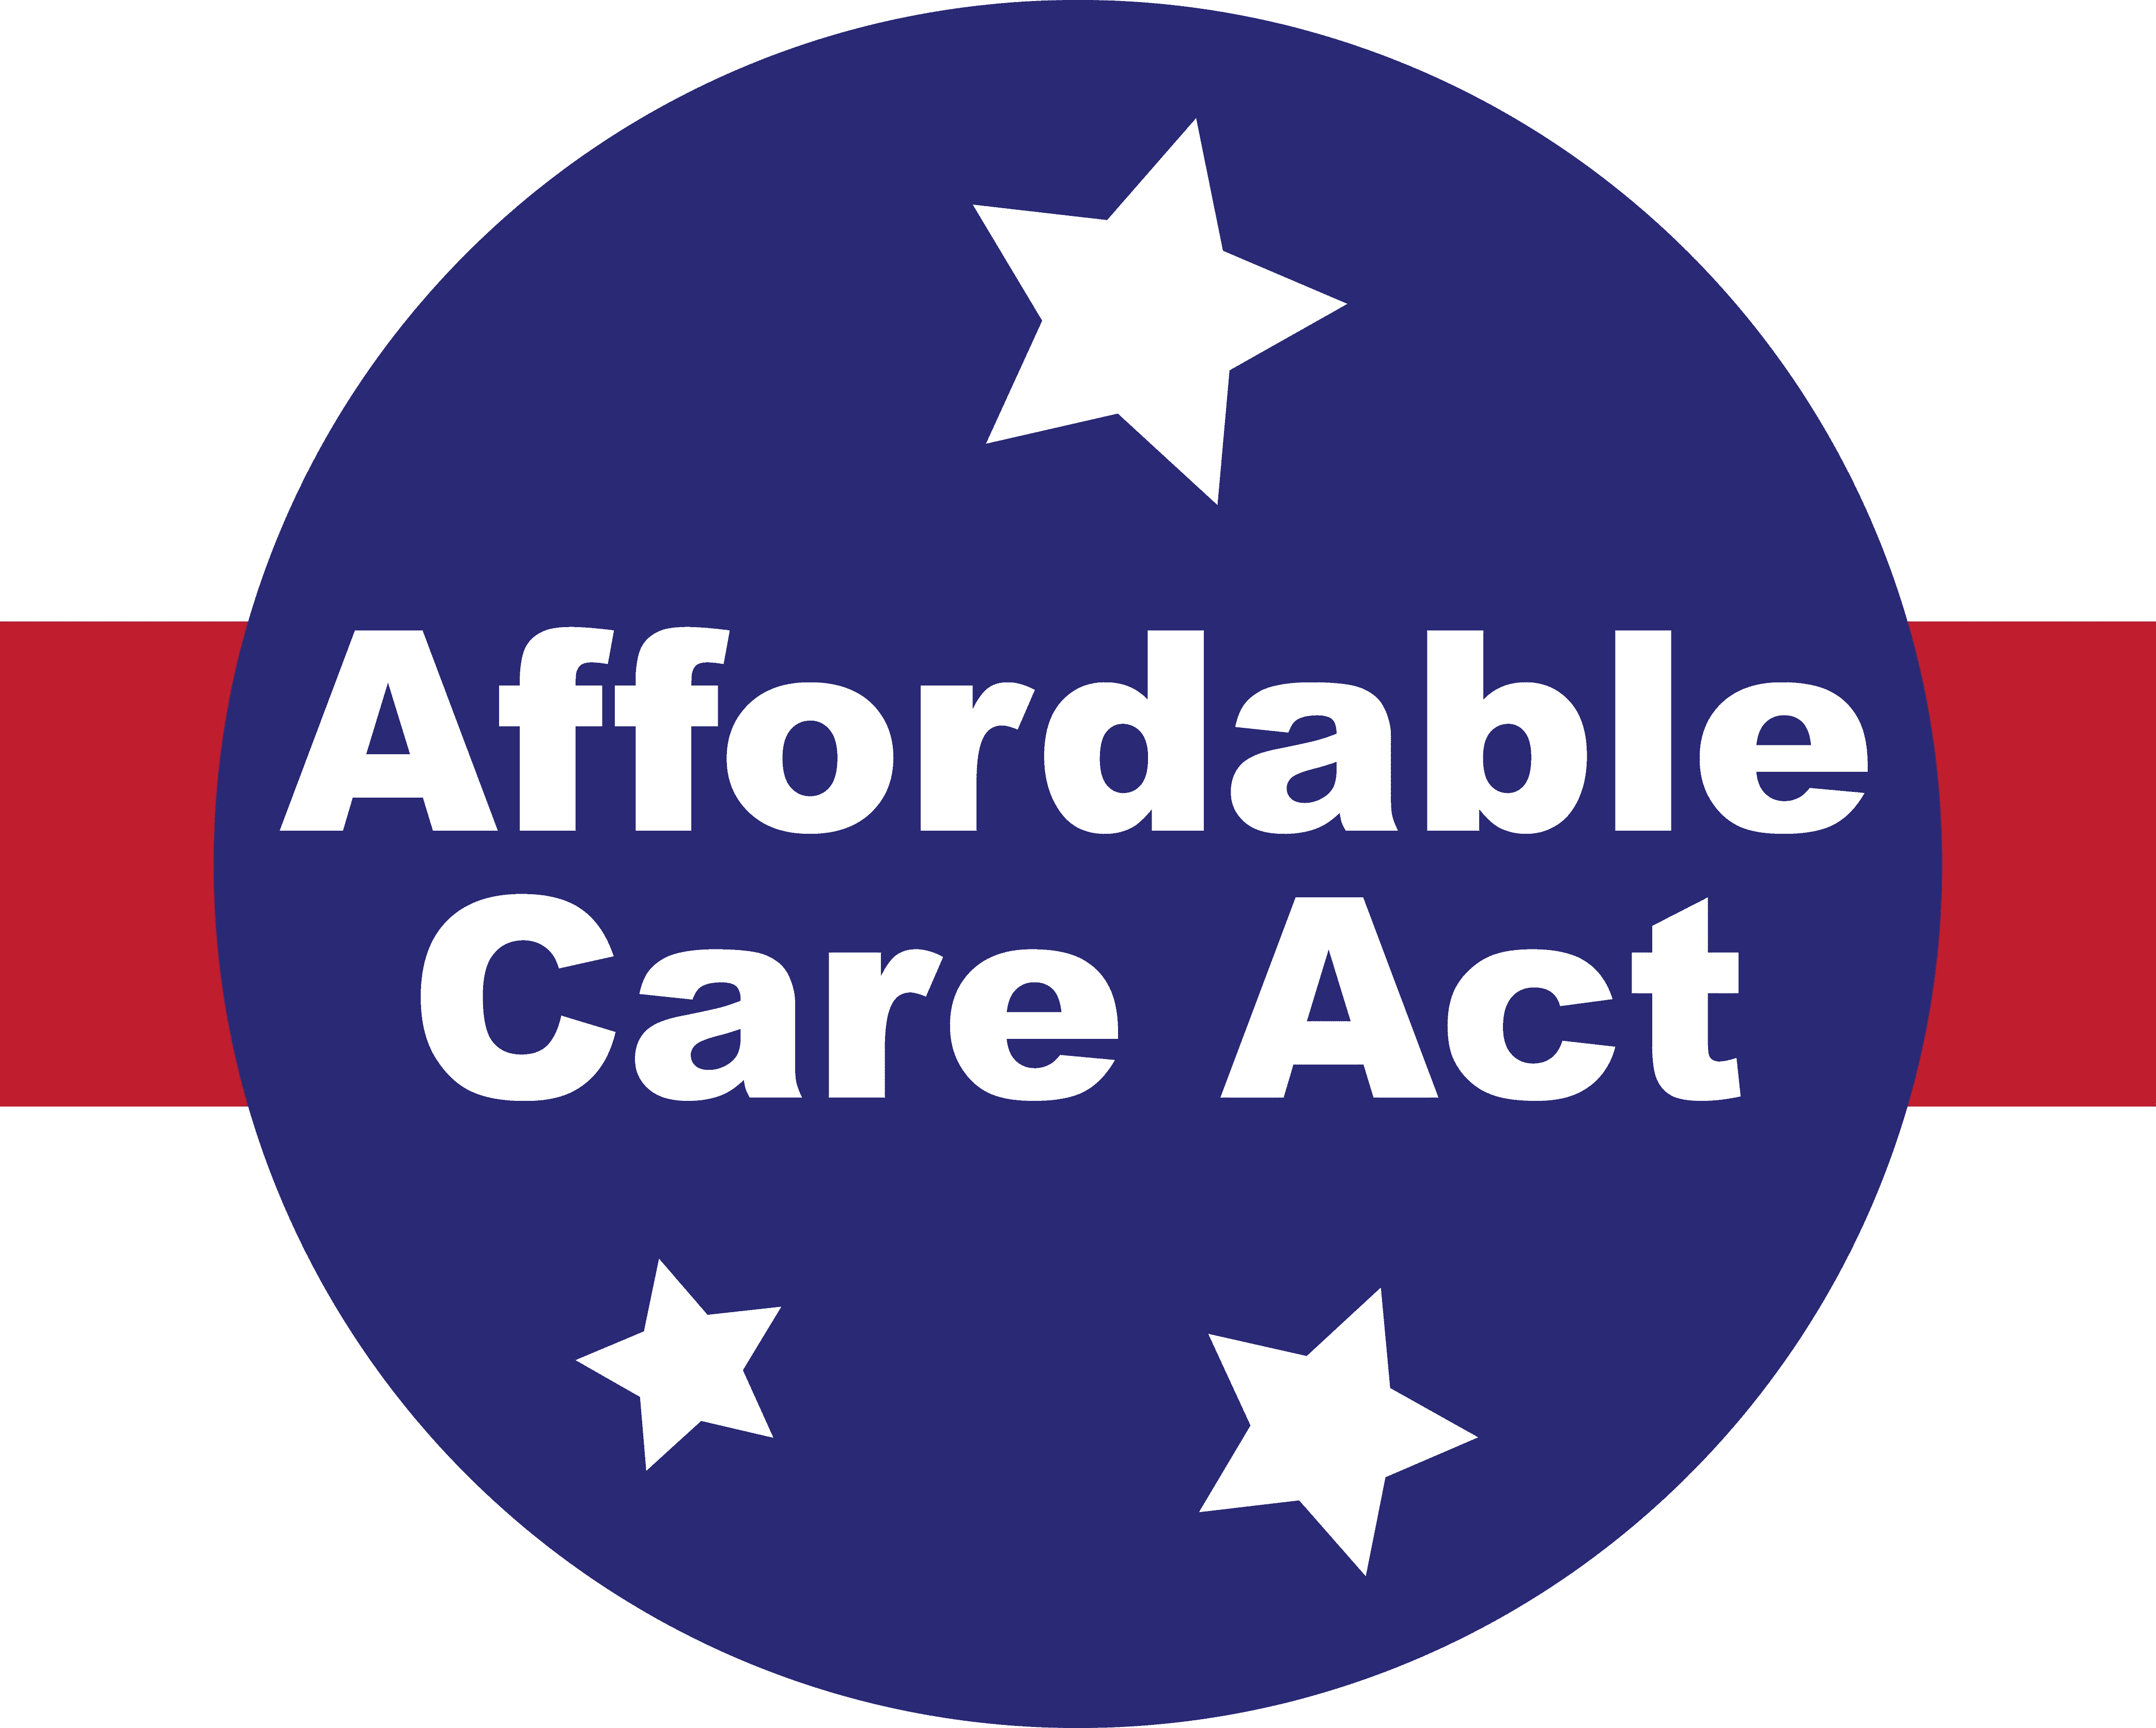 Affordable Care Act Review possibilities and future financial options!